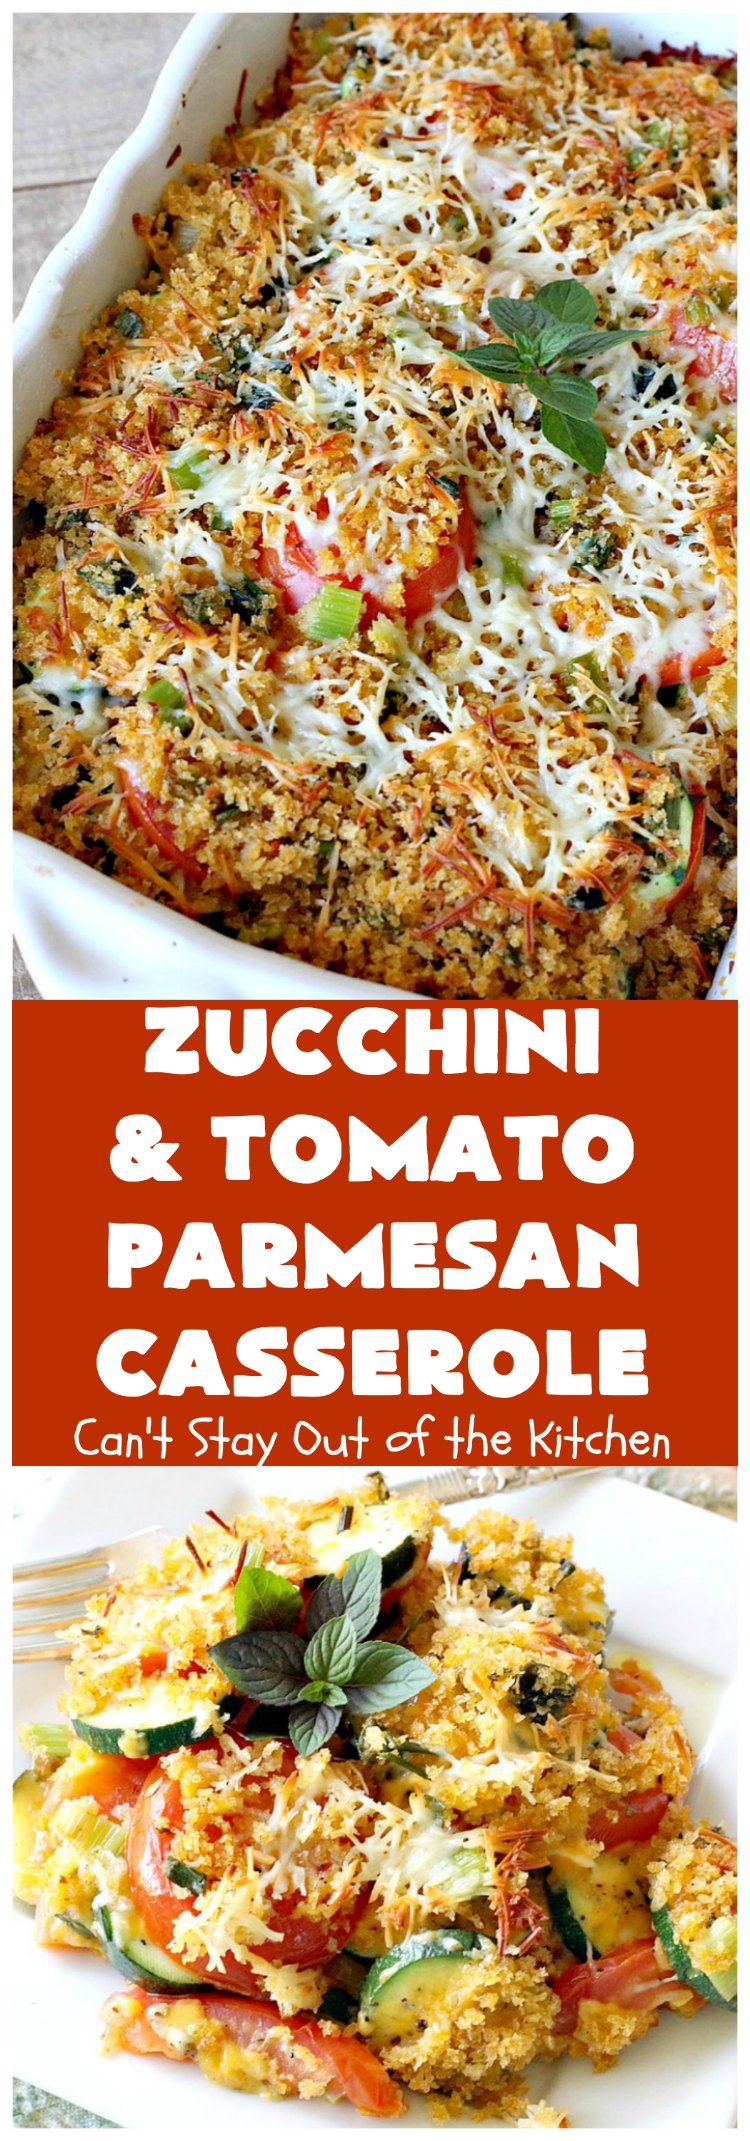 Zucchini and Tomato Parmesan Casserole | Can't Stay Out of the Kitchen